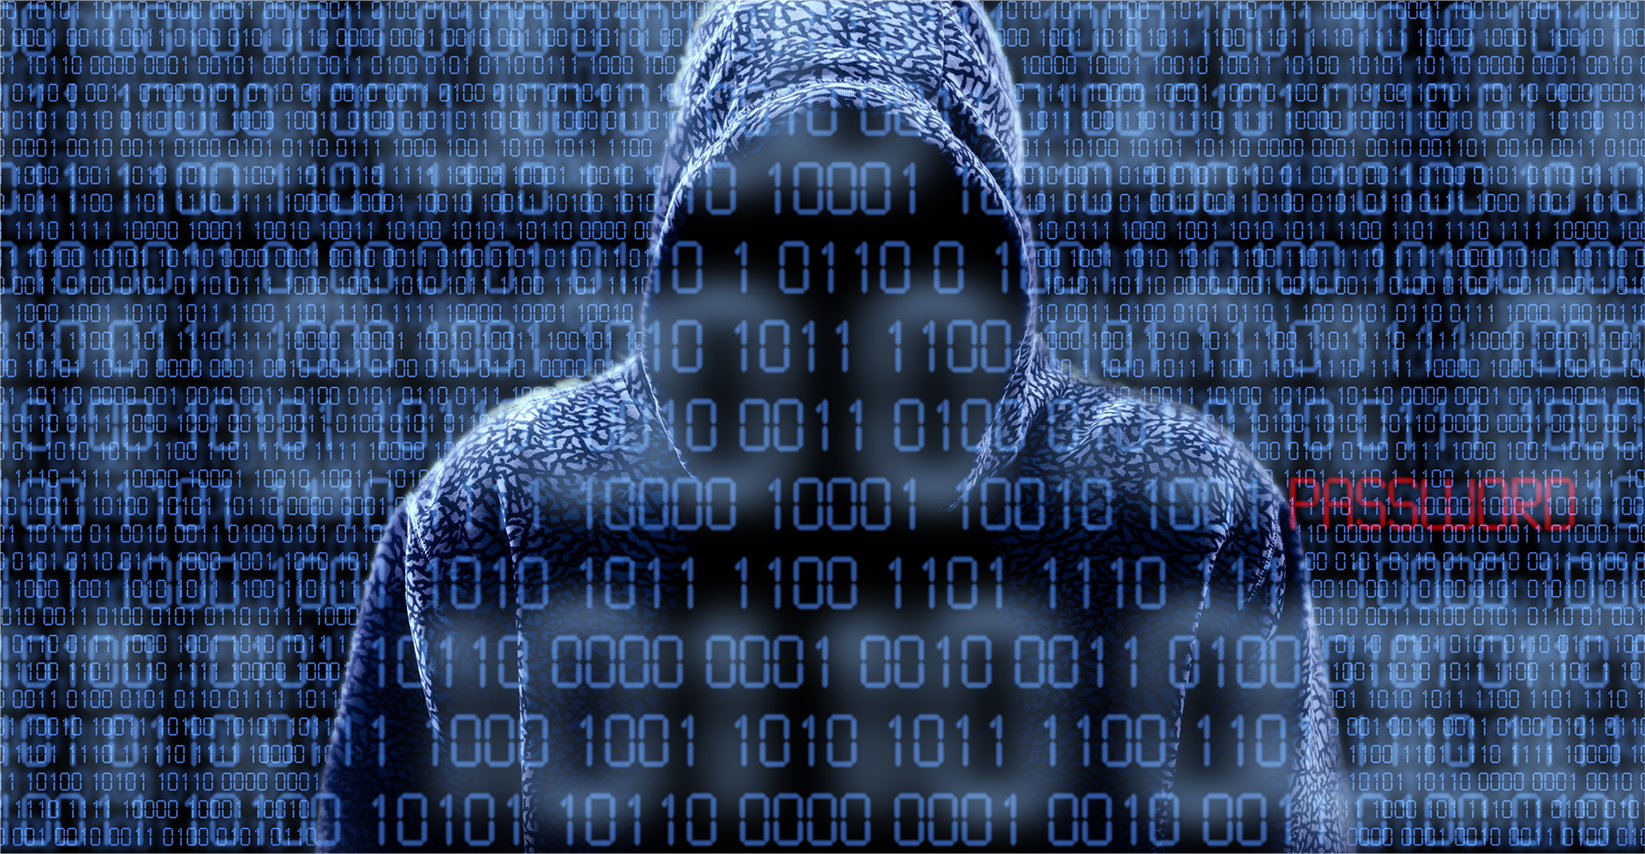 Silhouette of a hacker isloated on black — Stock Photo Silhouette of a hacker isloated on black with binary codes on background